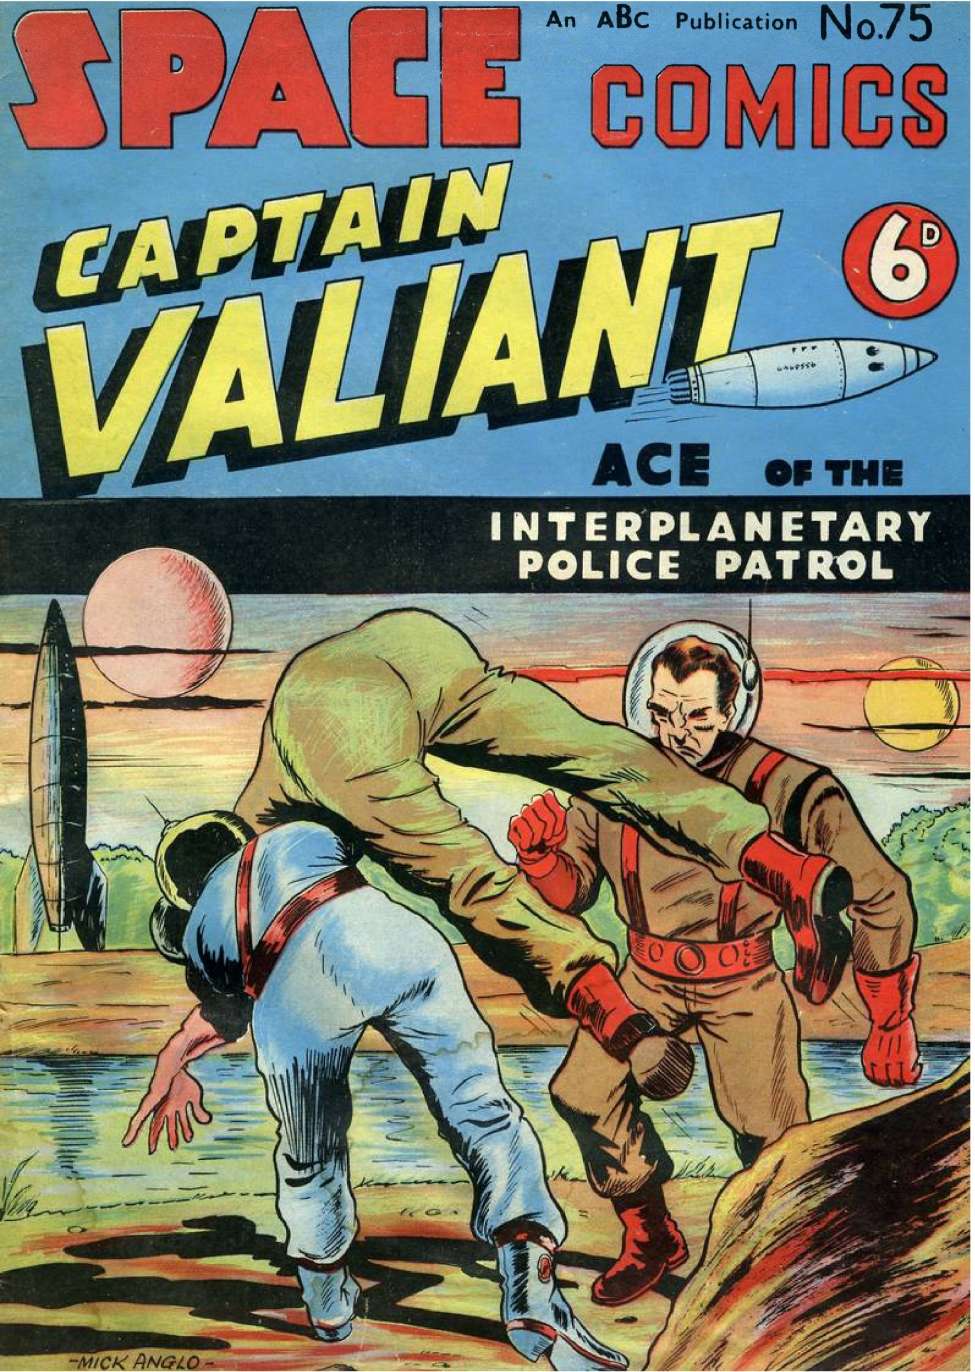 Book Cover For Space Comics (Captain Valiant) 75